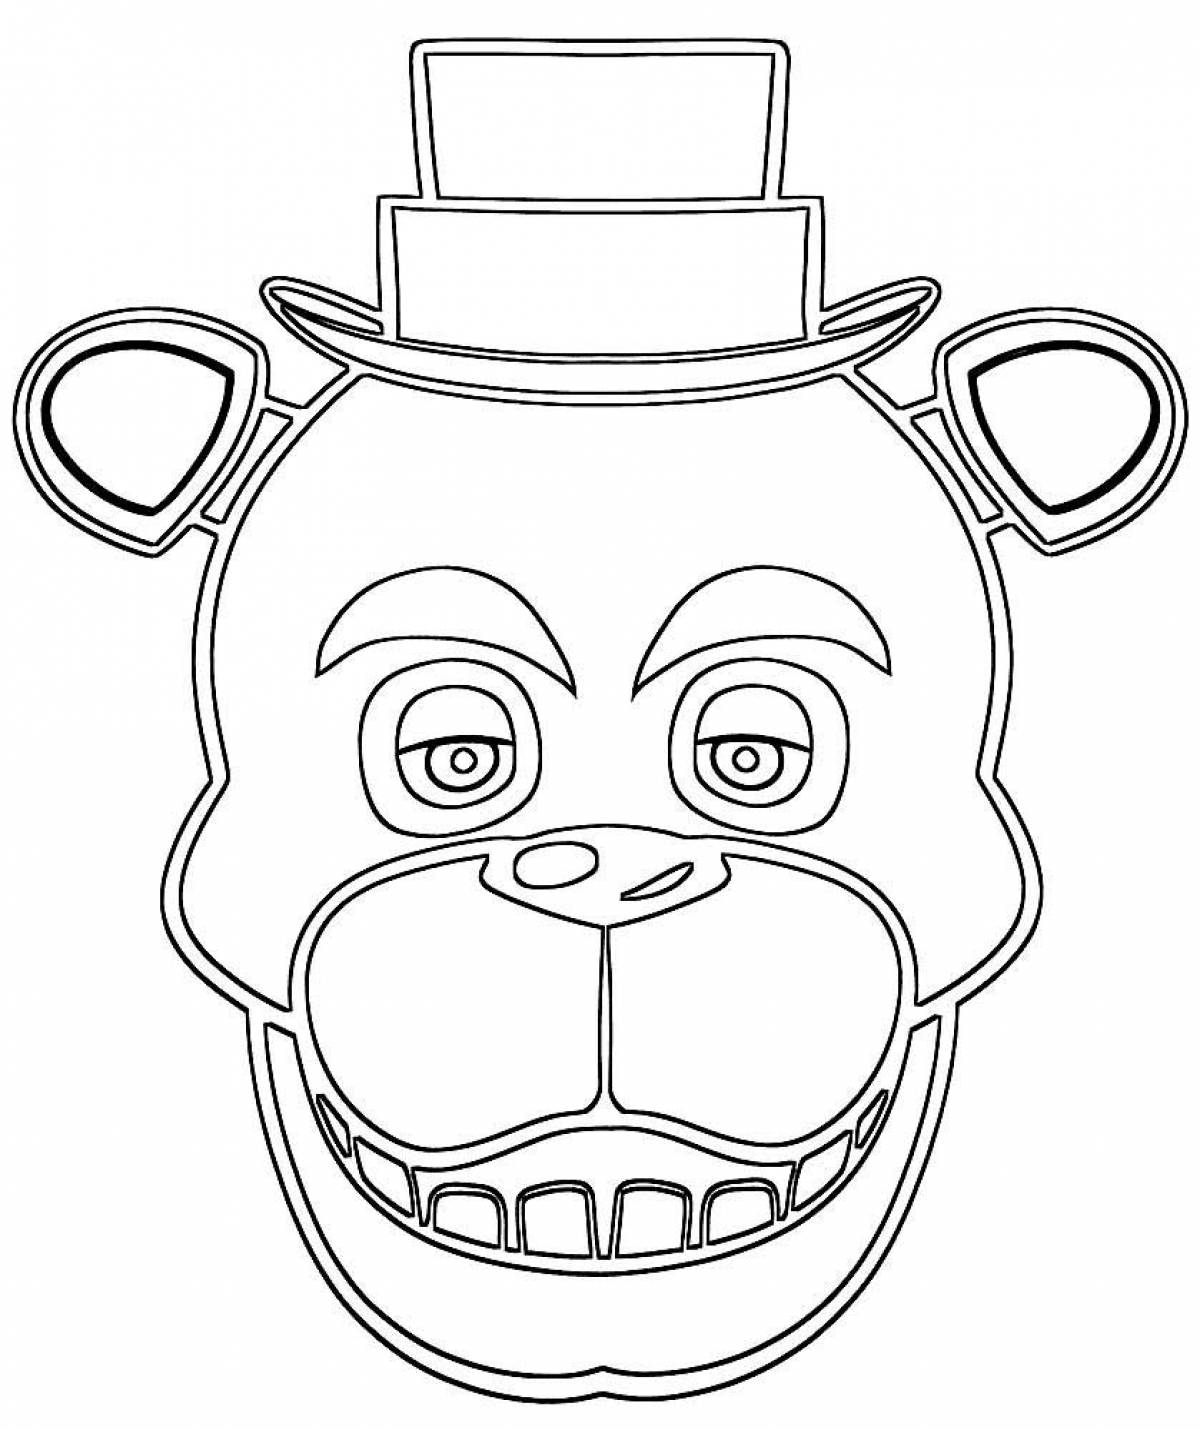 Freddy head coloring page